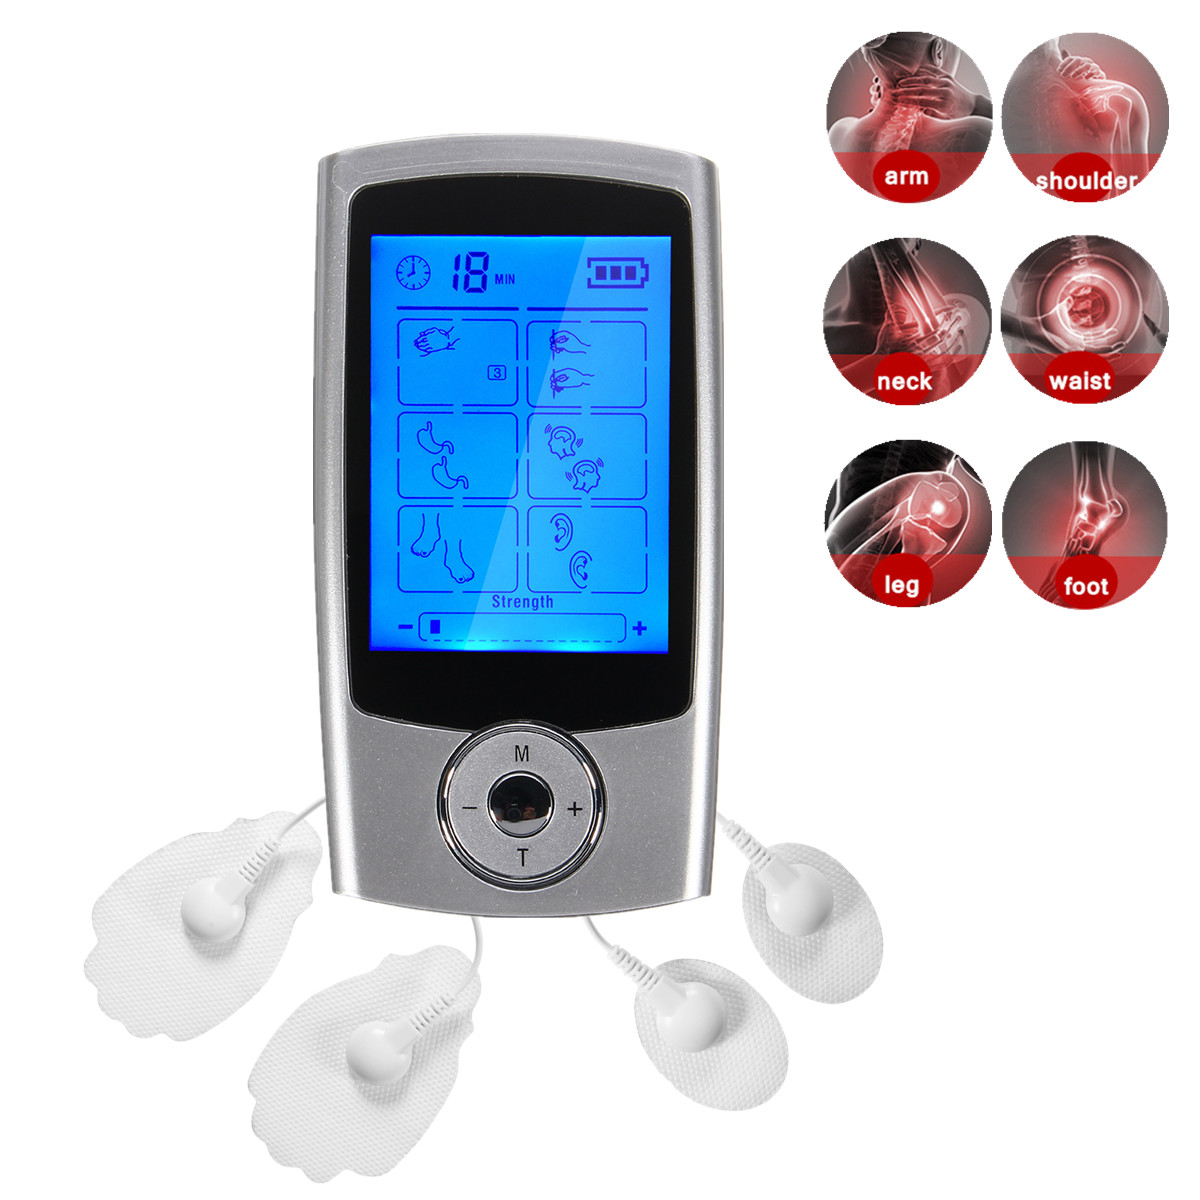 16-Modes-Portable-Electric-Pulse-TENS-EMS-Massager-Therapy-Machine-Dual-Output-1257485